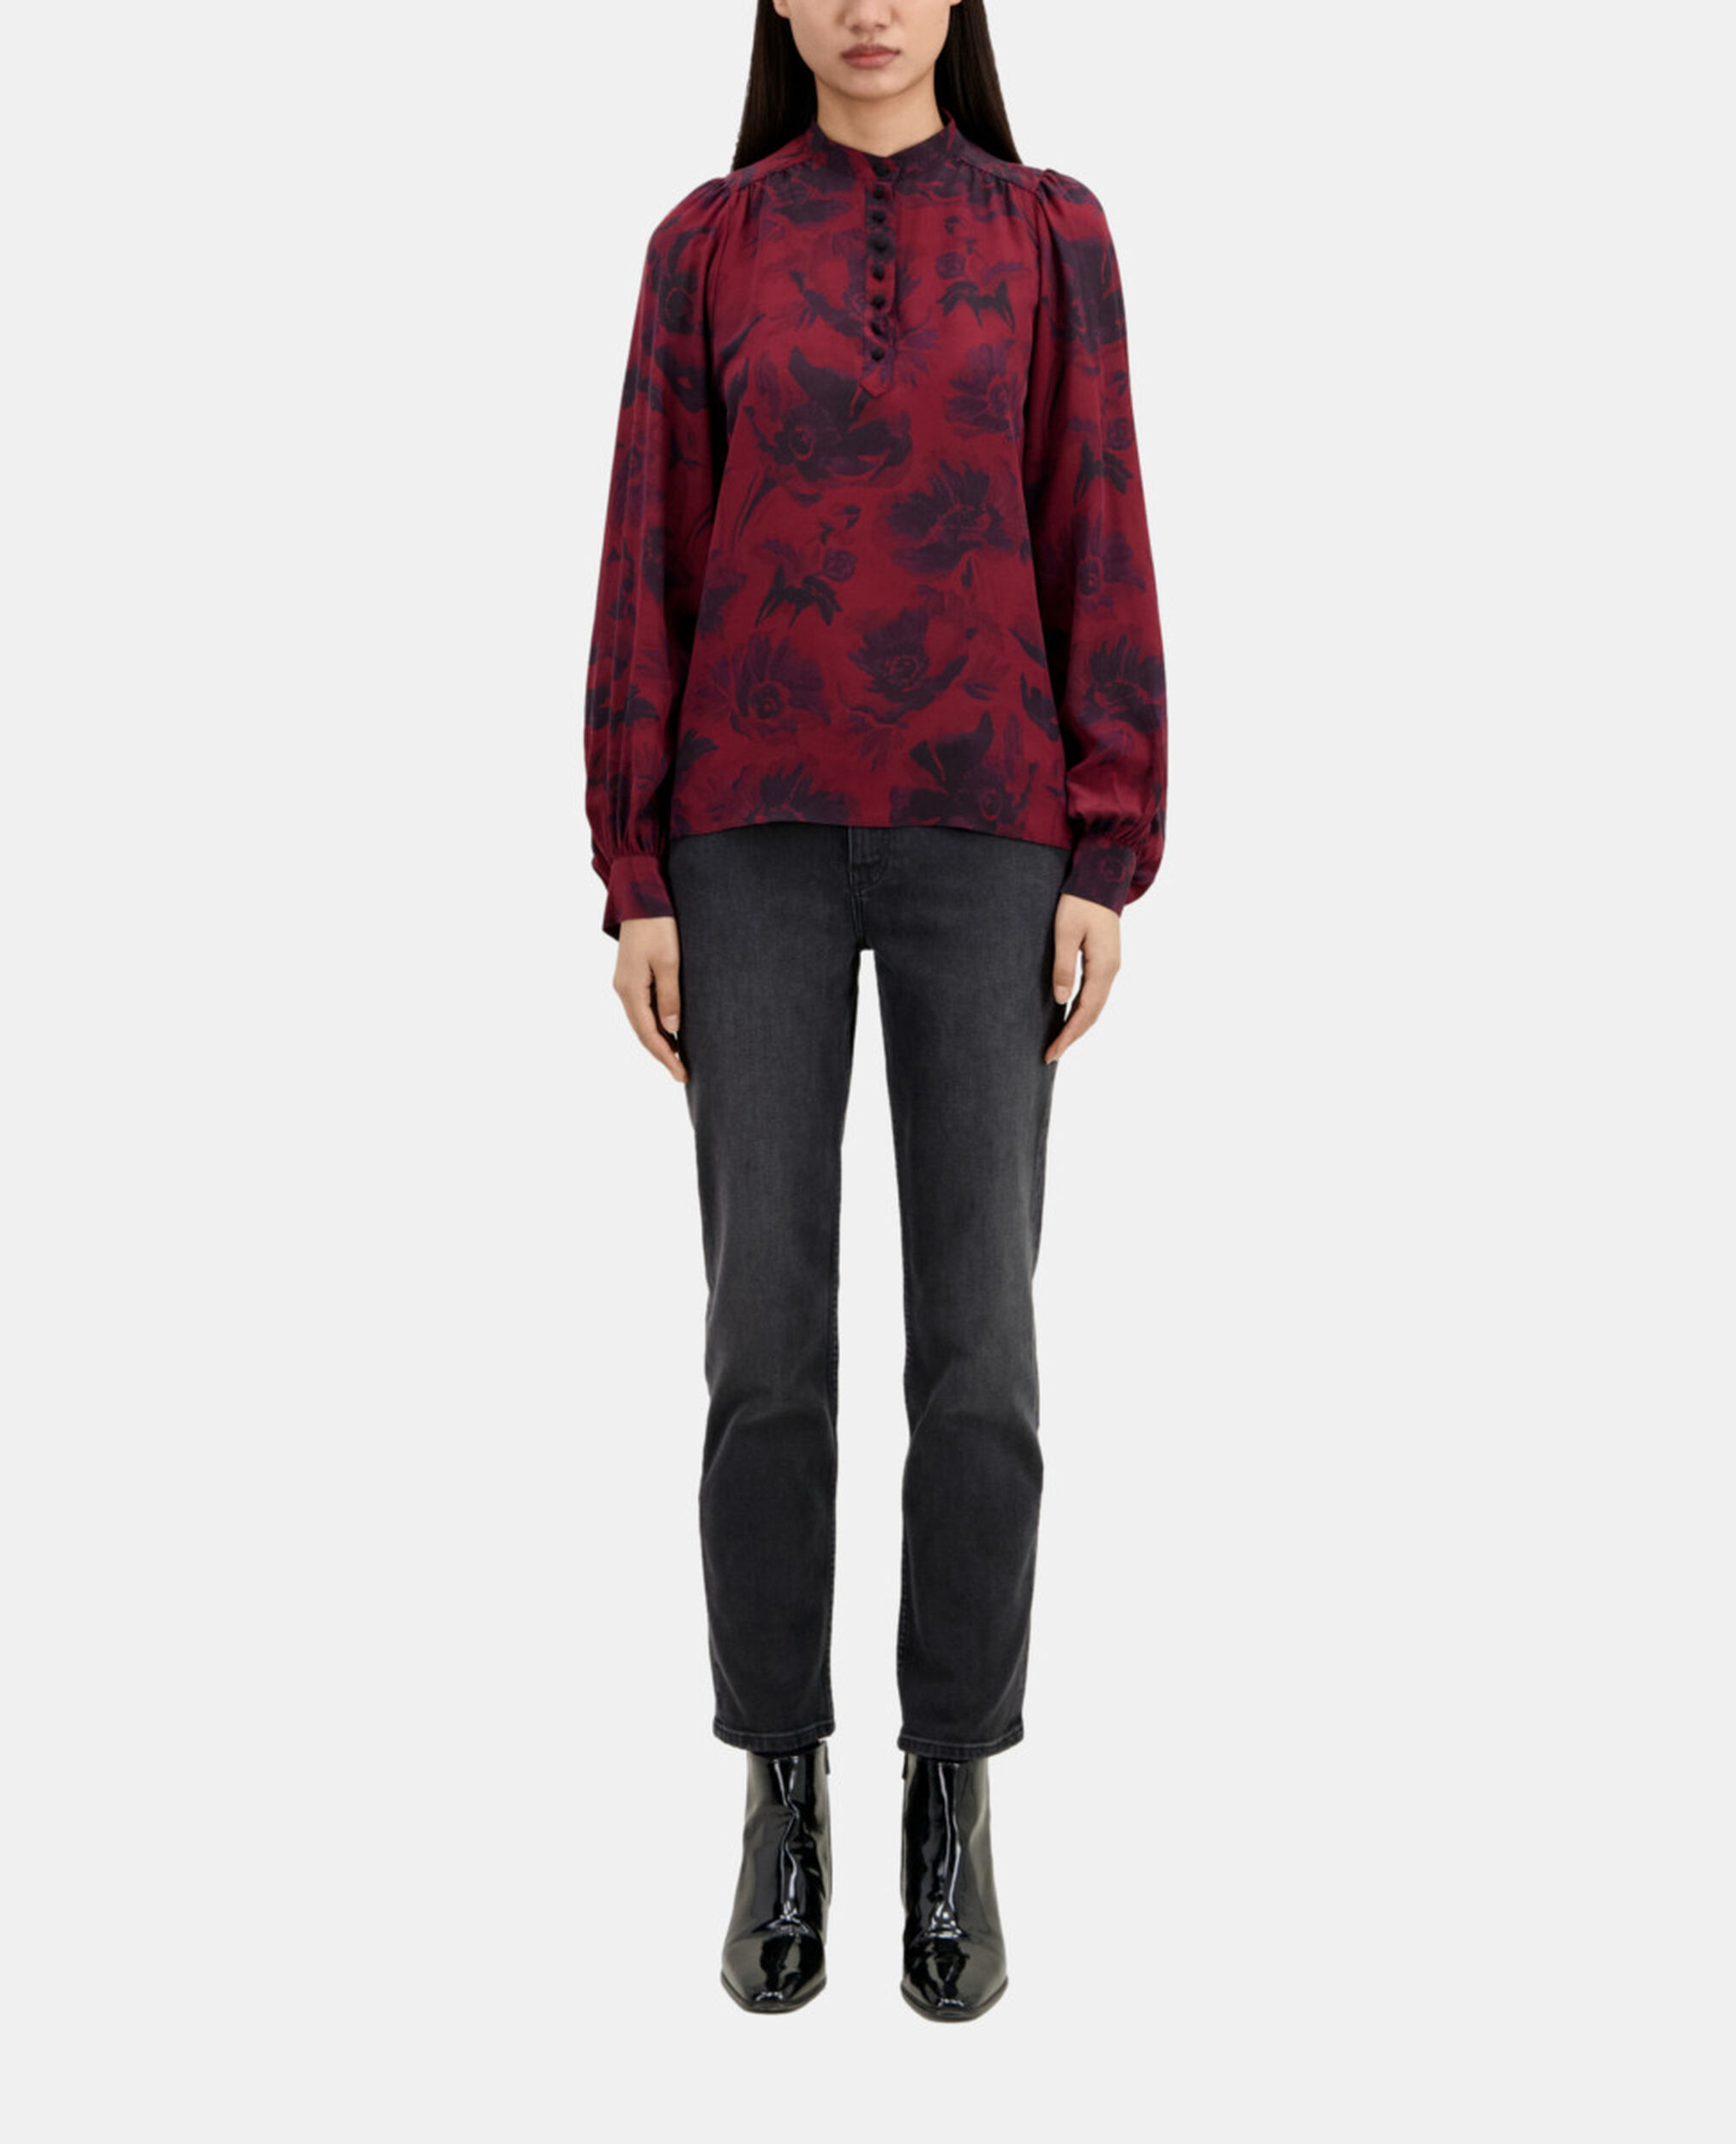 Printed top with buttoning, BLACK - BURGUNDY, hi-res image number null